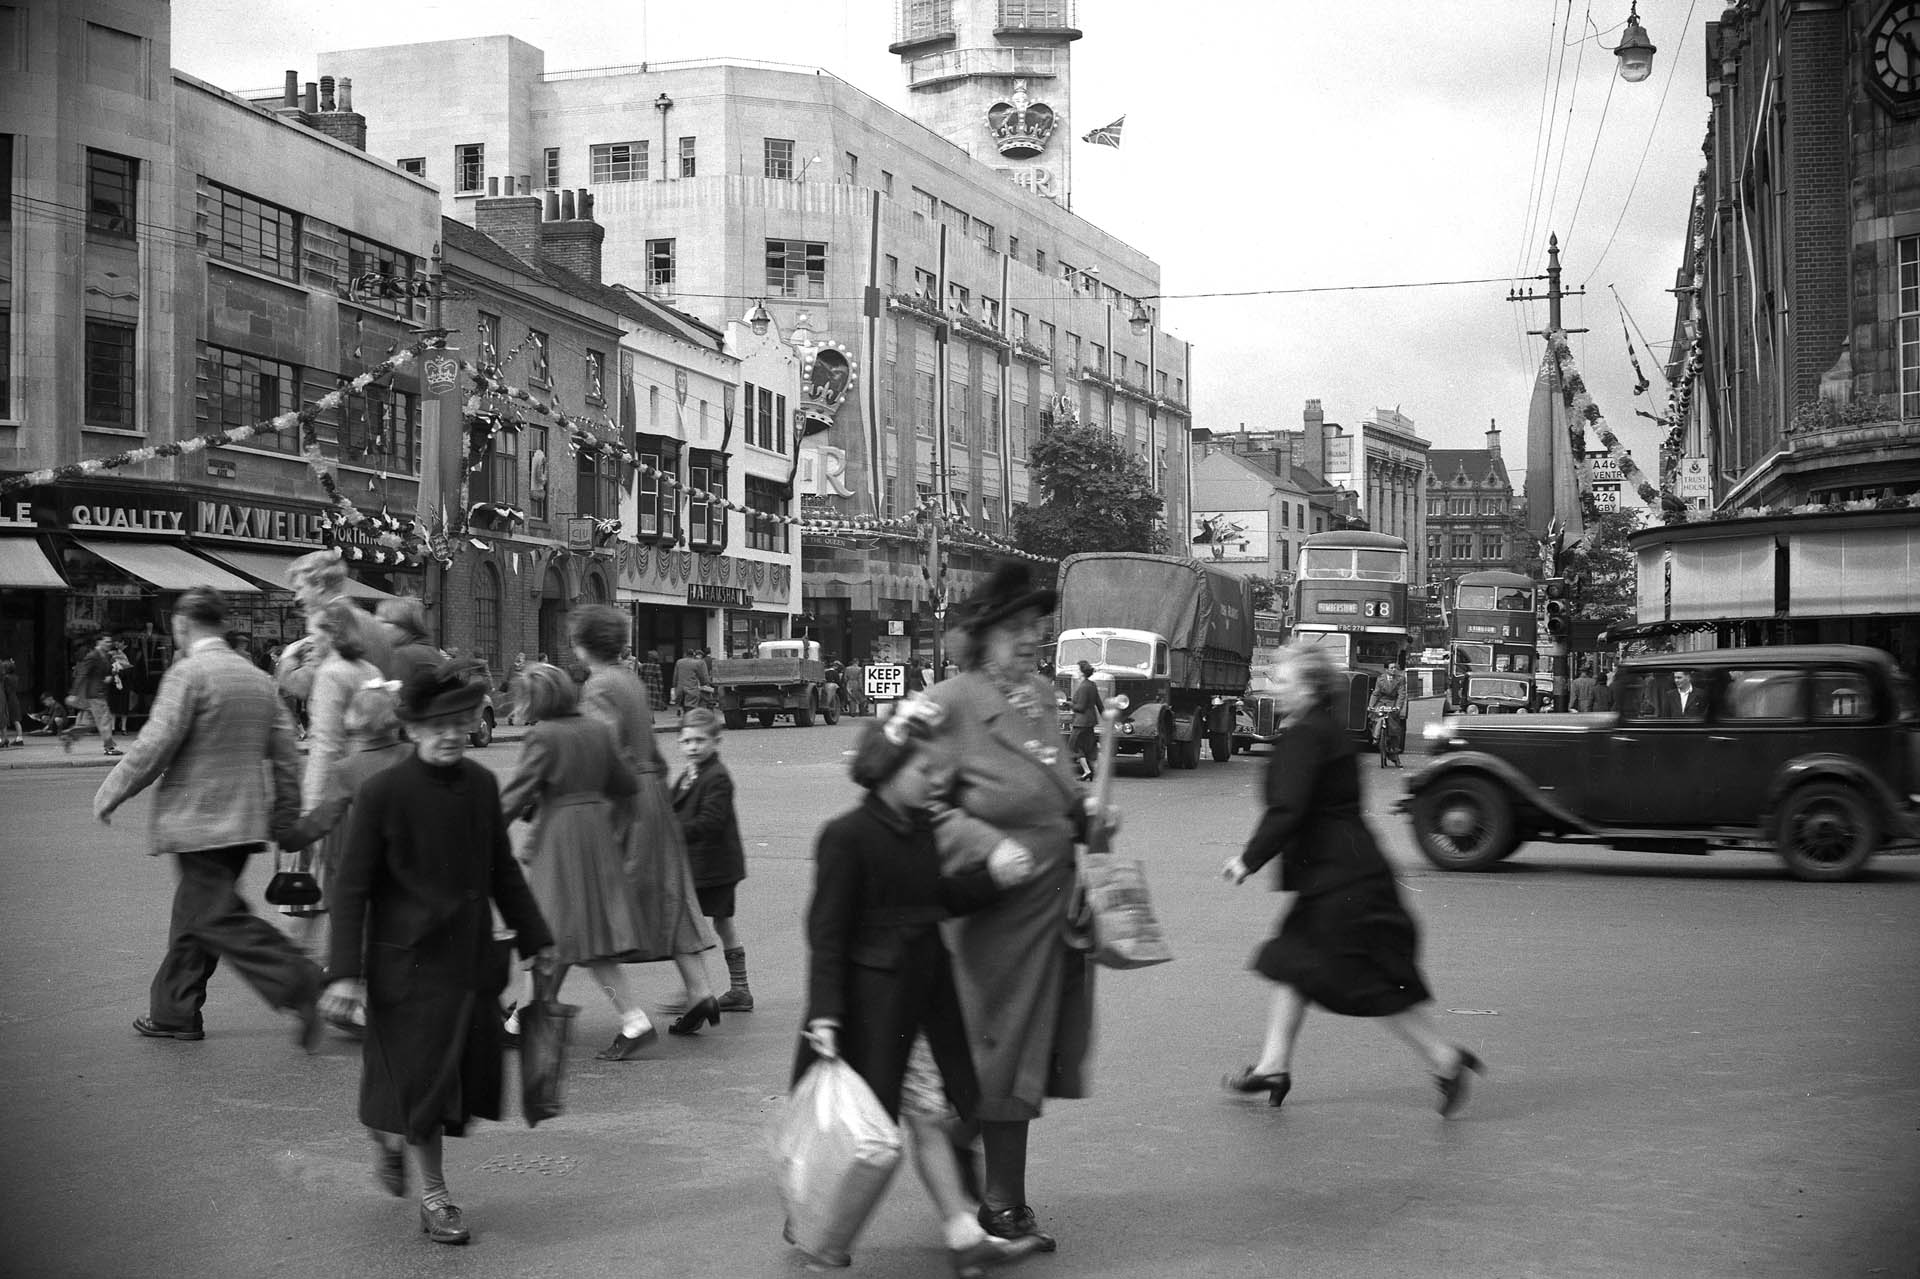 Humberstone Gate with a highly decorated Lewis’s in the centre, 1953 -